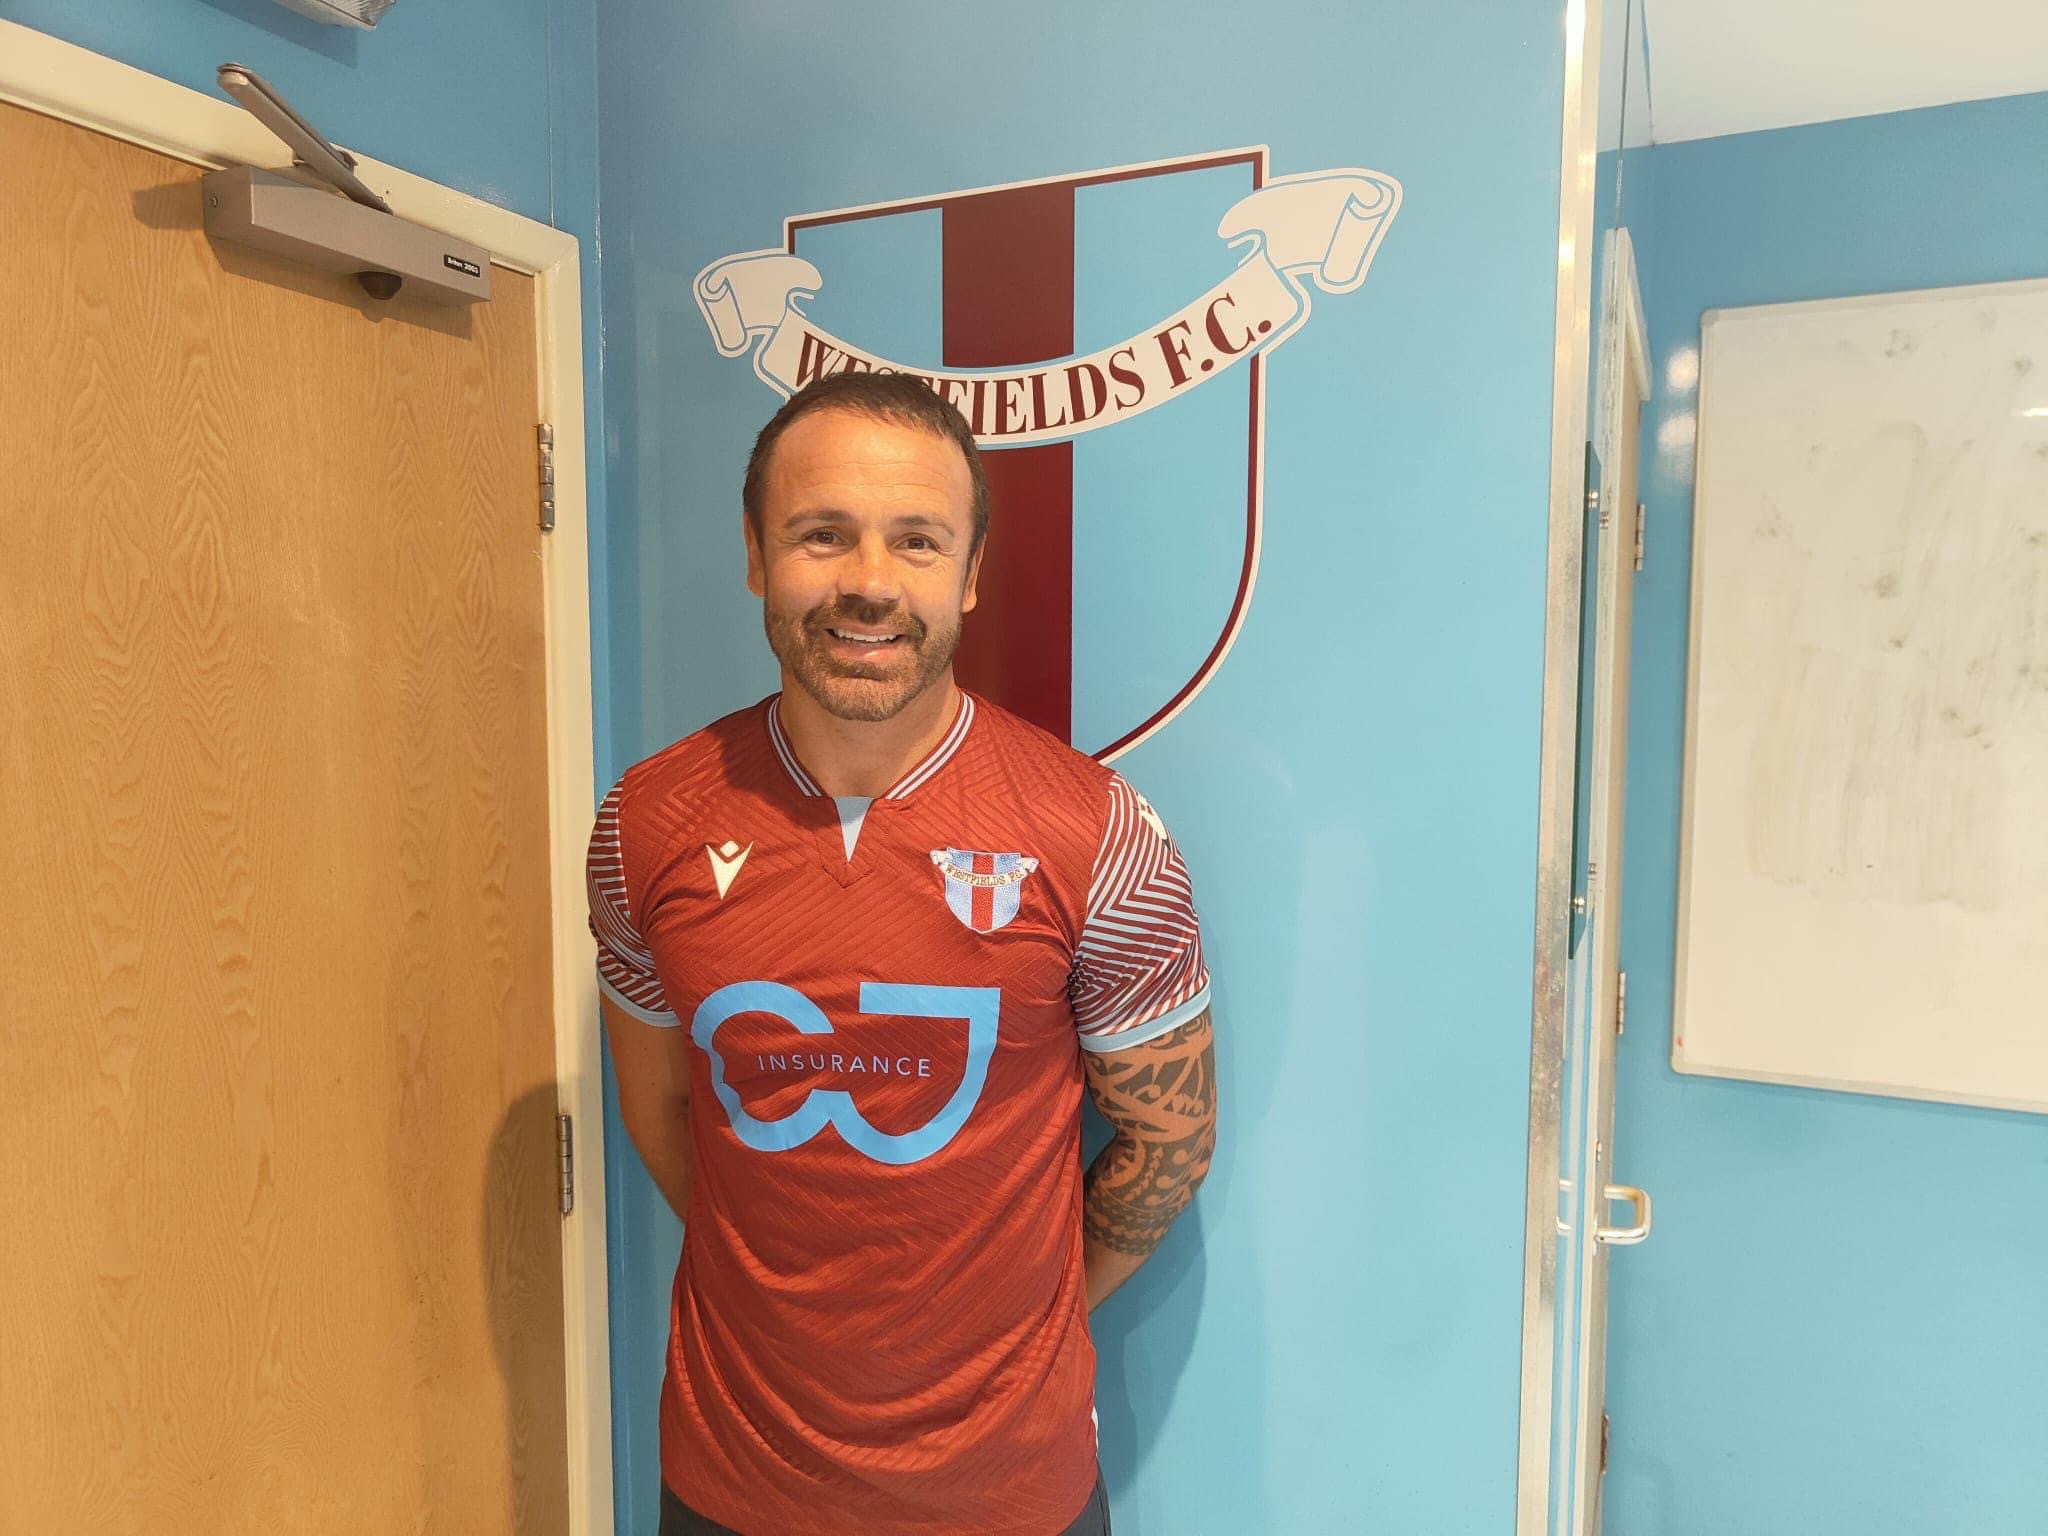 FOOTBALL | Phil Glover delighted as Ryan Green commits to Westfields FC for the forthcoming season